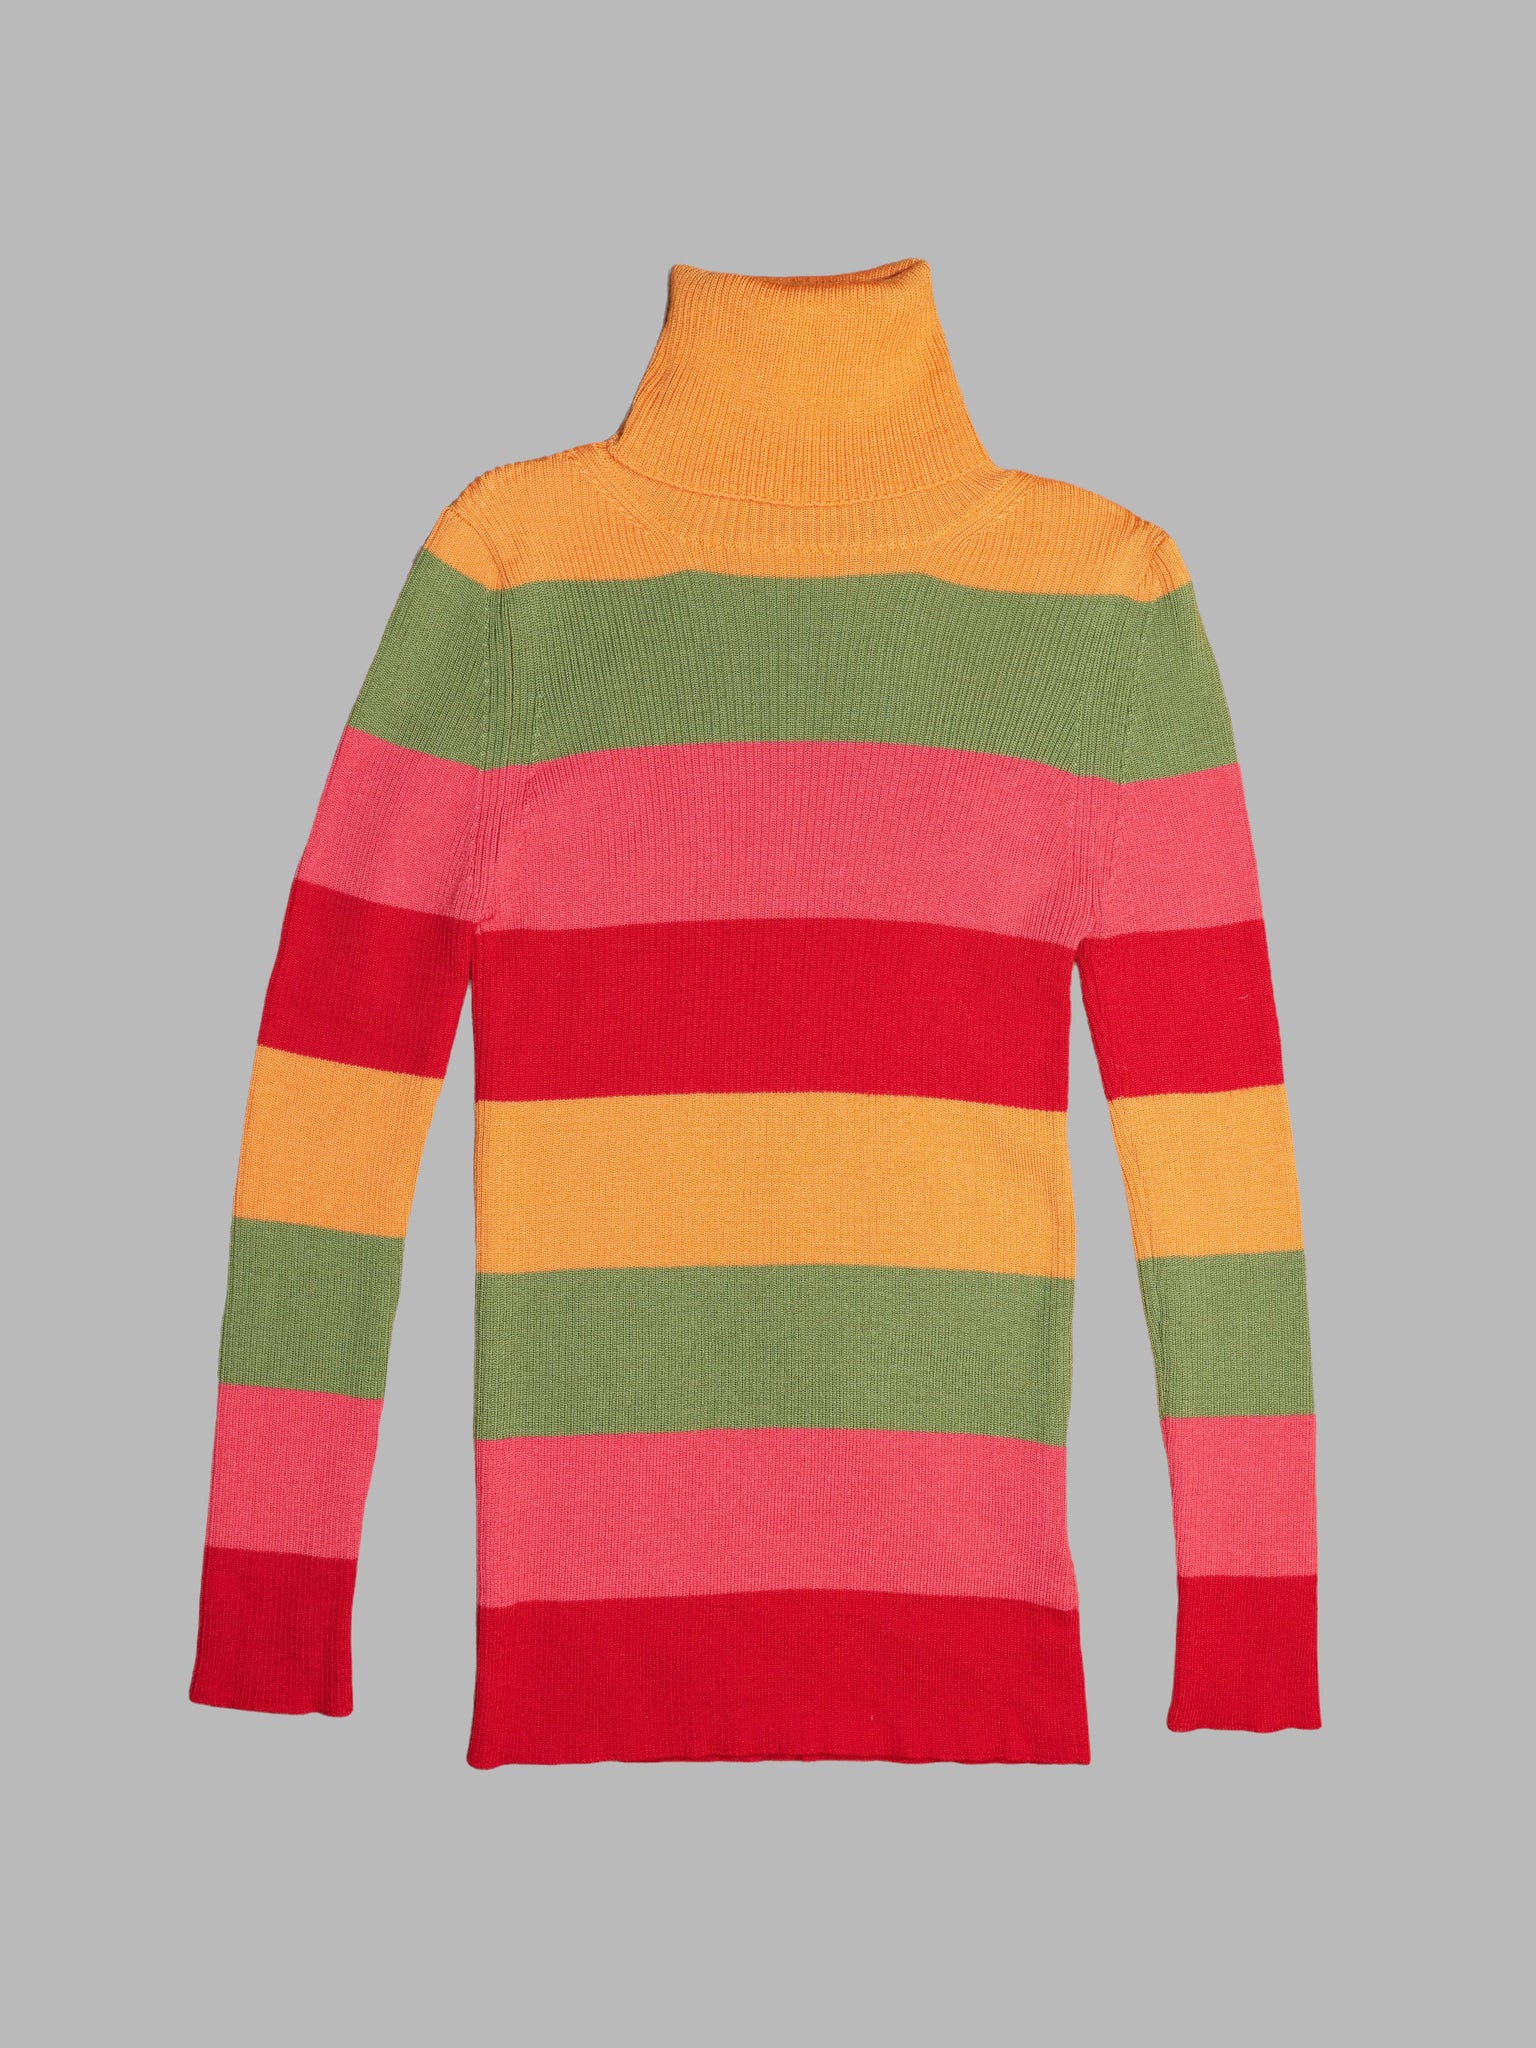 Junya Watanabe Comme des Garcons AW2004 multicolour striped wool turtleneck